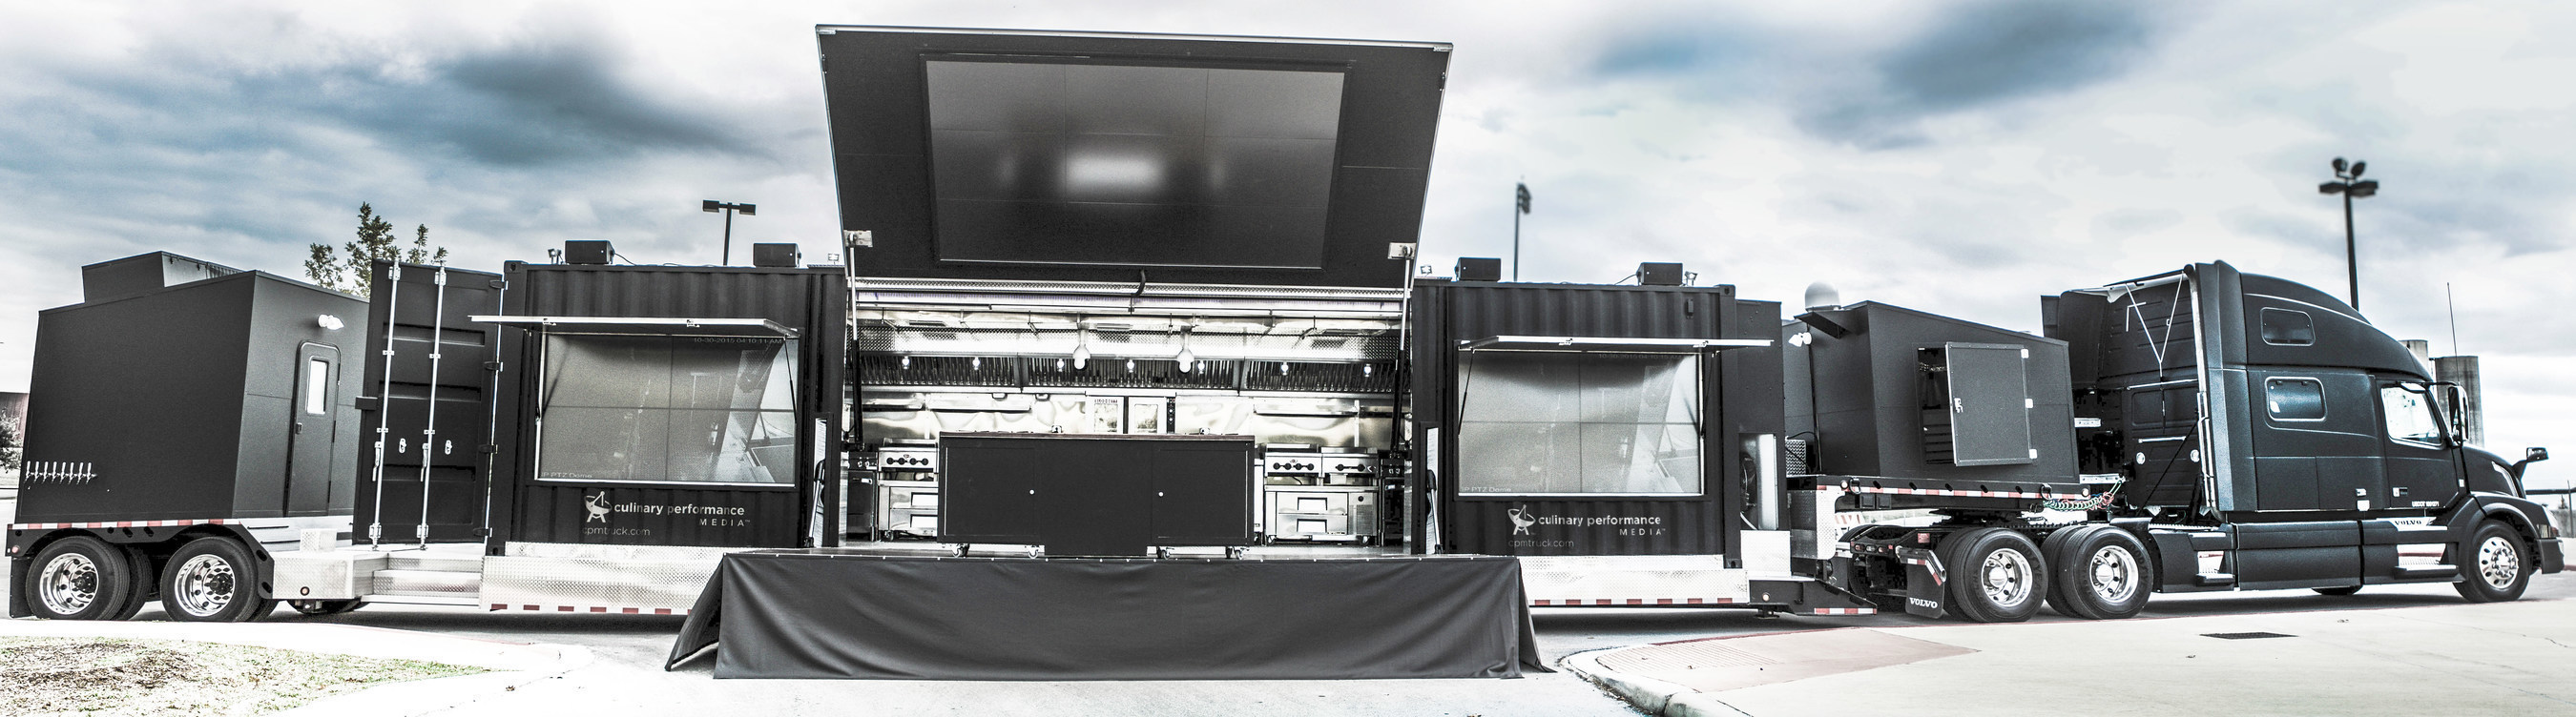 The behemoth, 70-foot T.R.U.C.K! unfolds to reveal dual competition pro kitchens, a roll-out stage, and three interactive audio/visual display walls.